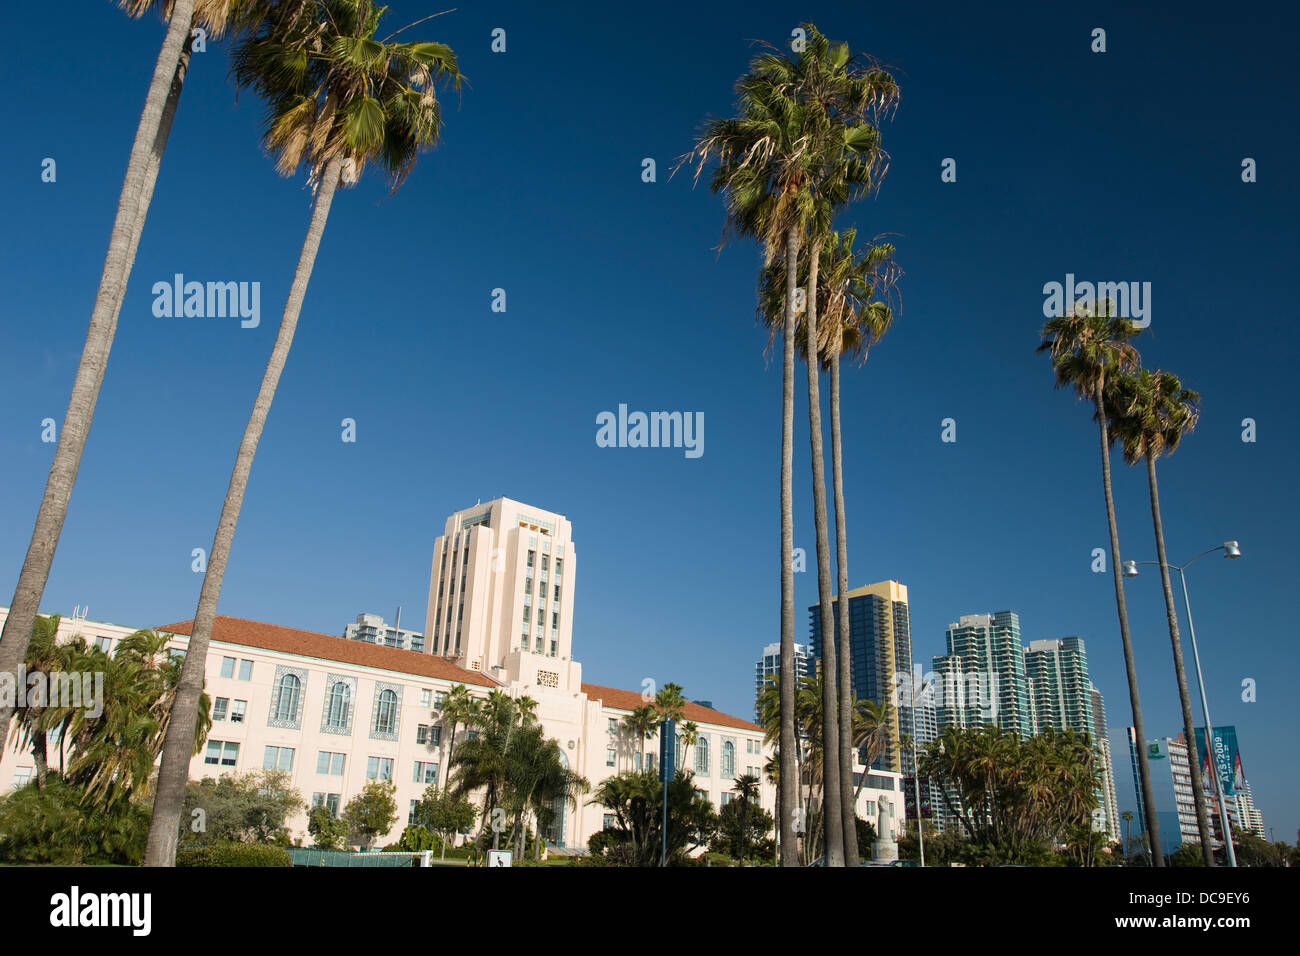 CITY AND COUNTY ADMINISTRATIVE BUILDING NORTH HARBOR DRIVE SAN DIEGO CALIFORNIA USA Stock Photo